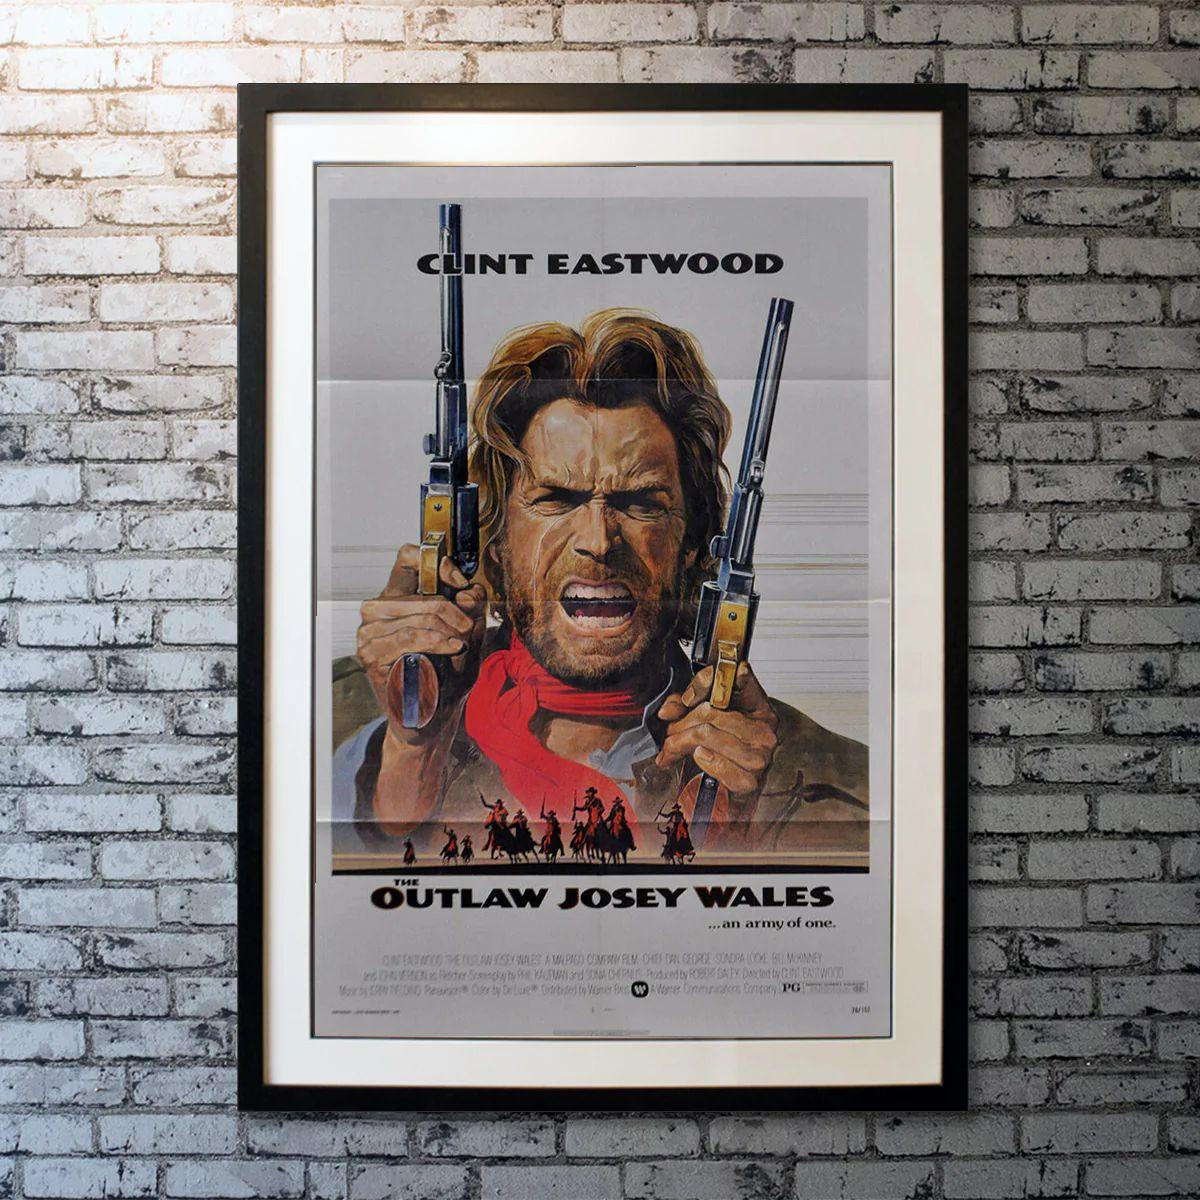 The Outlaw Josey Wales, Unframed Poster, 1976 

Missouri farmer Josey Wales joins a Confederate guerrilla unit and winds up on the run from the Union soldiers who murdered his family.

Year: 1976
Nationality: United States
Condition: Folded
Type: